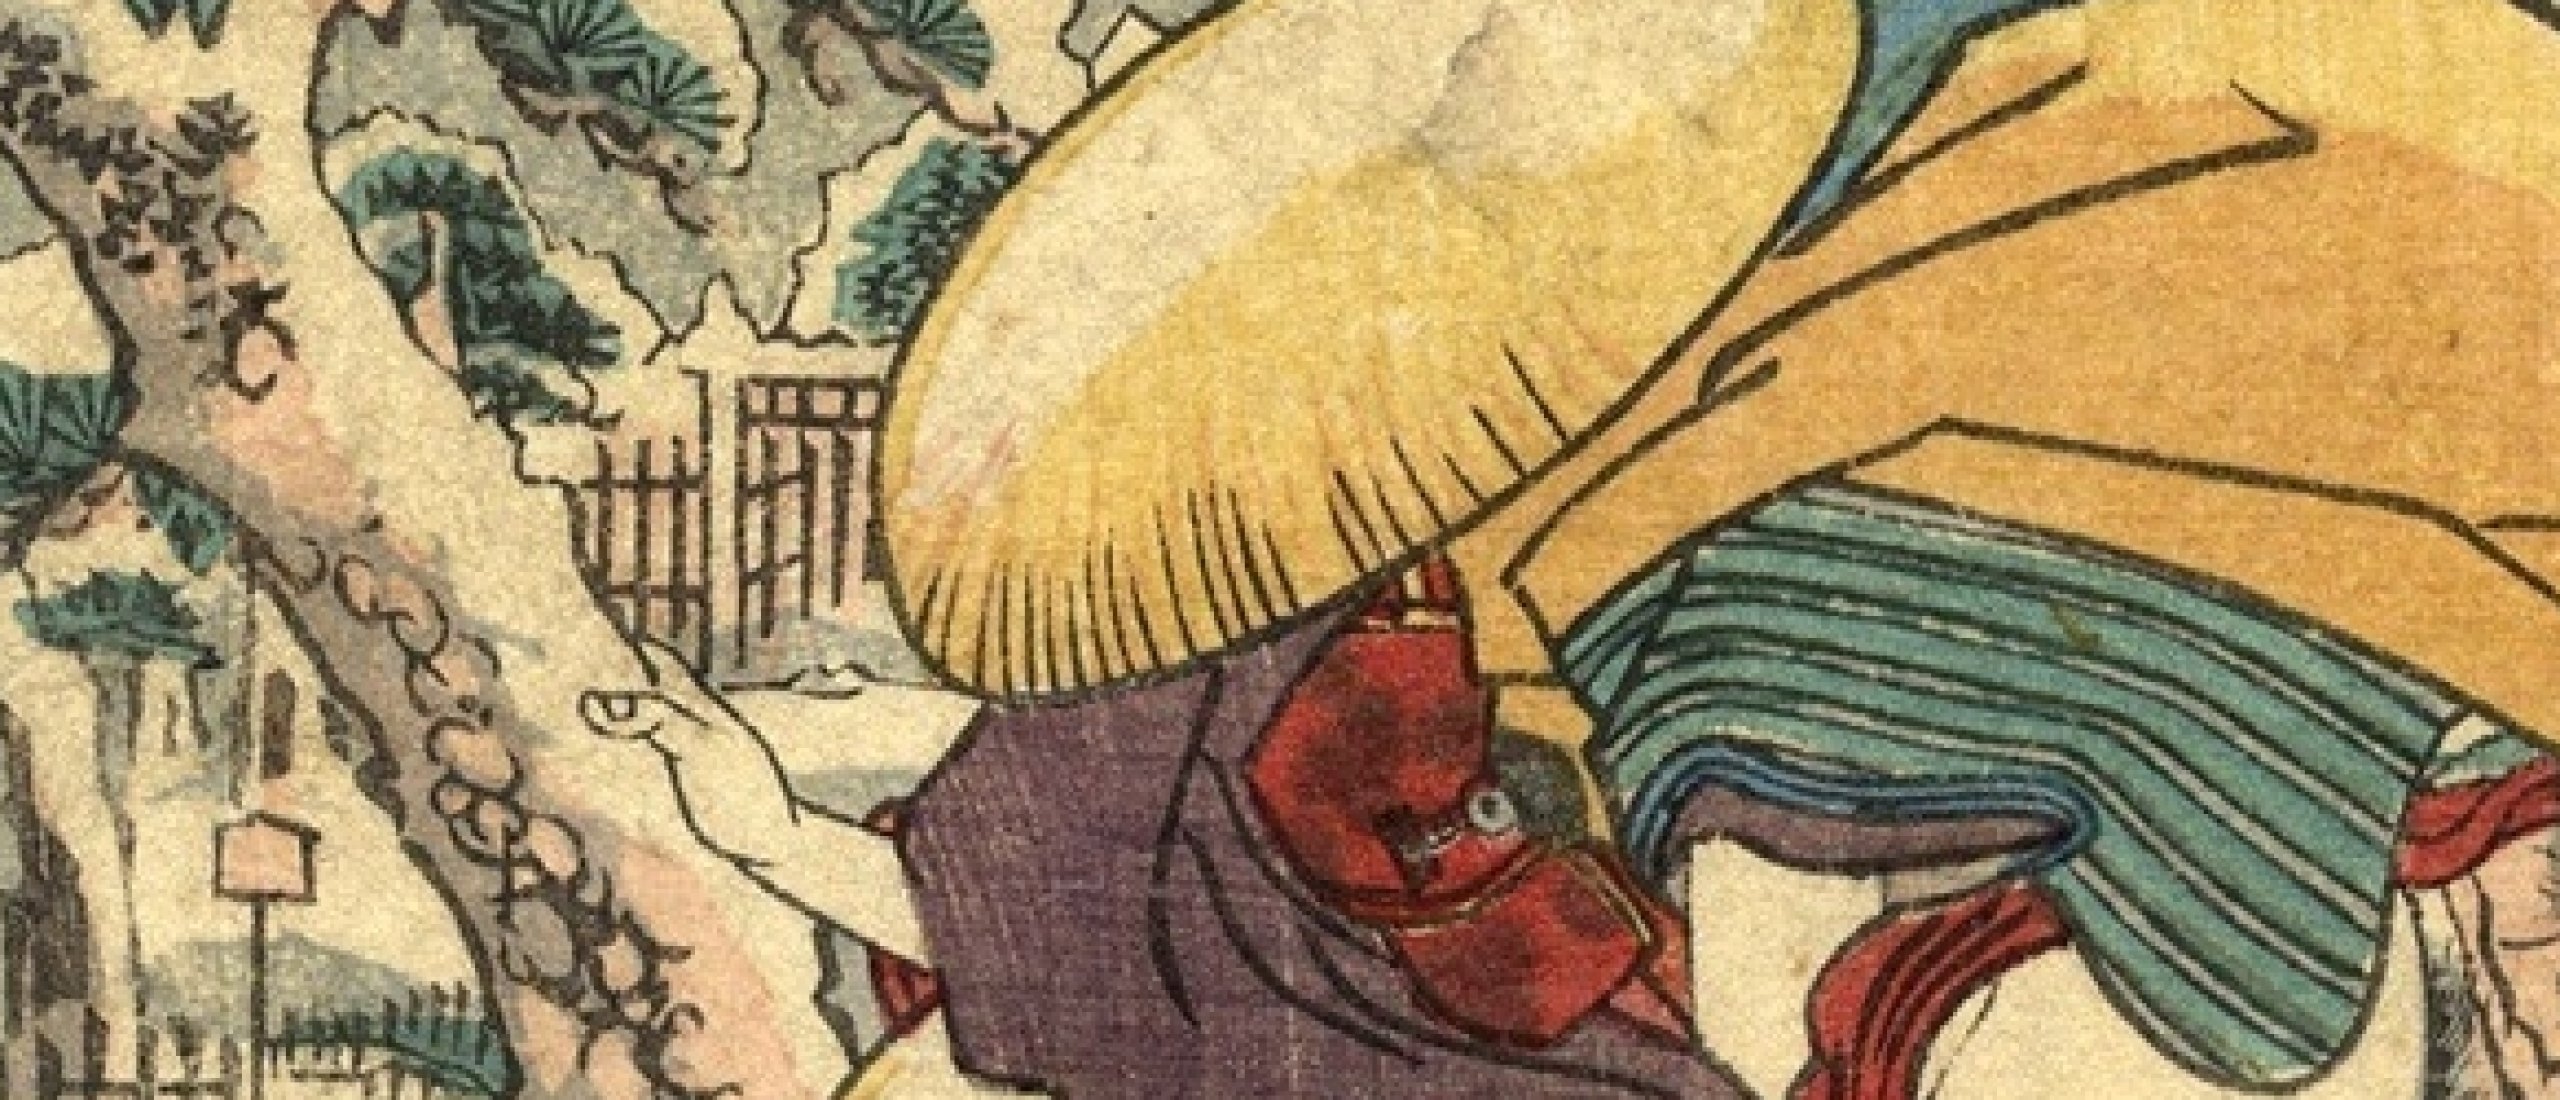 Enchanting Shunga Images With a Touch of Winter Magic (P2)